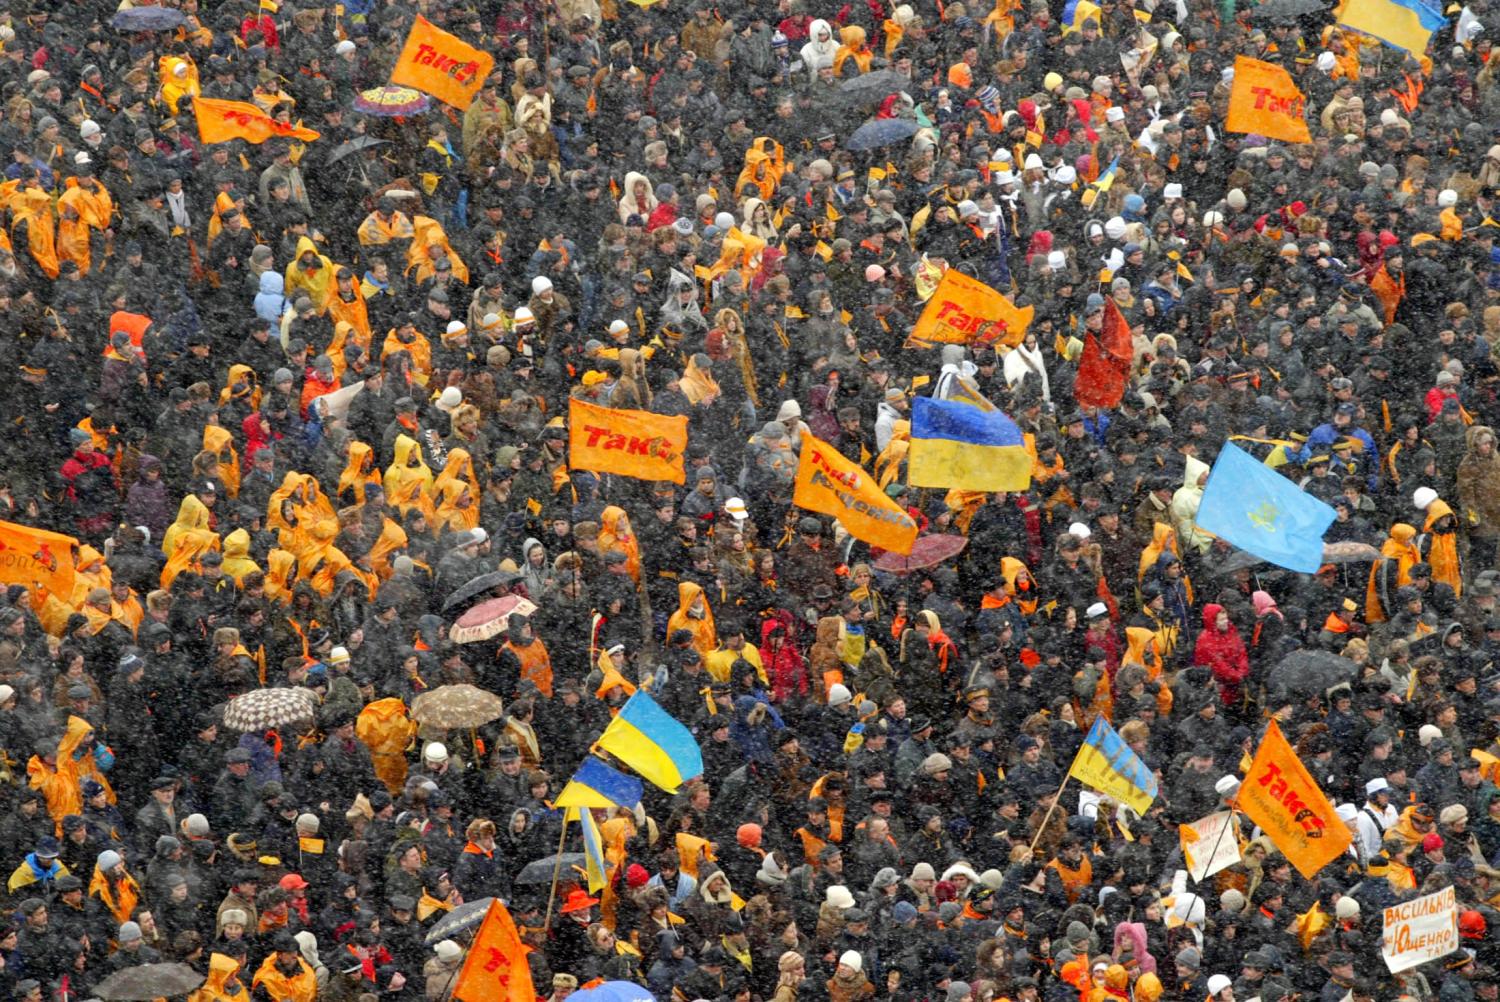 Supporters of opposition presidential candidate Yushchenko wave flags as they take part in a rally in central Kyiv.